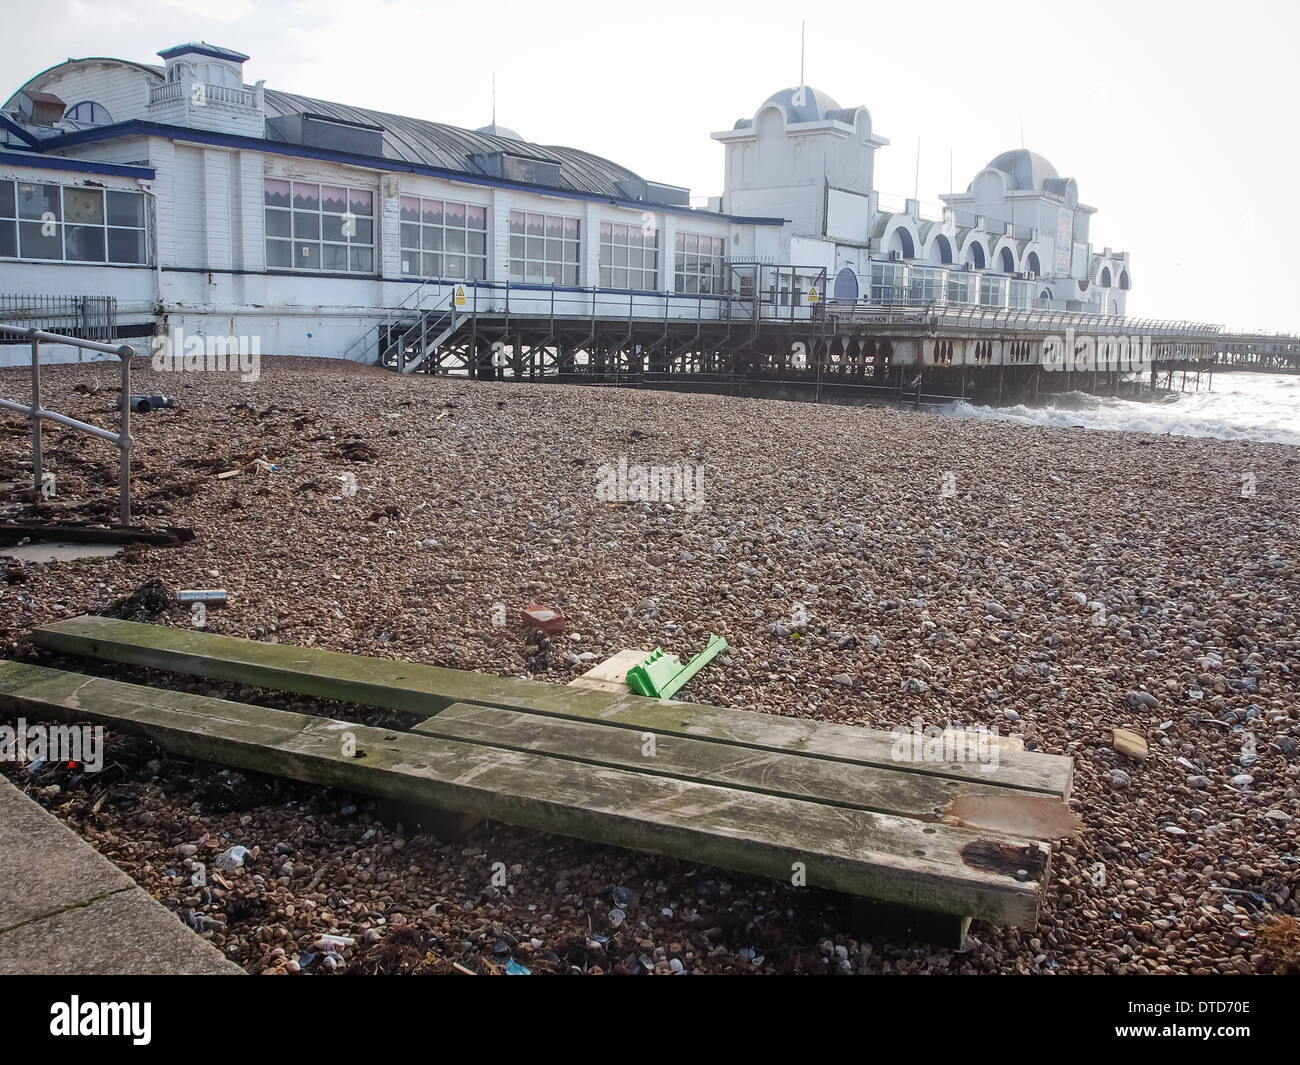 Portsmouth, Hampshire, England 15th February 2014 Wood from the Damaged south Parade Pier lies along the beach after high winds and strong tides battered the pier overnight causing further structural damage. the pier has been closed to the public due to structural safety issues for over a year Credit:  simon evans/Alamy Live News Stock Photo